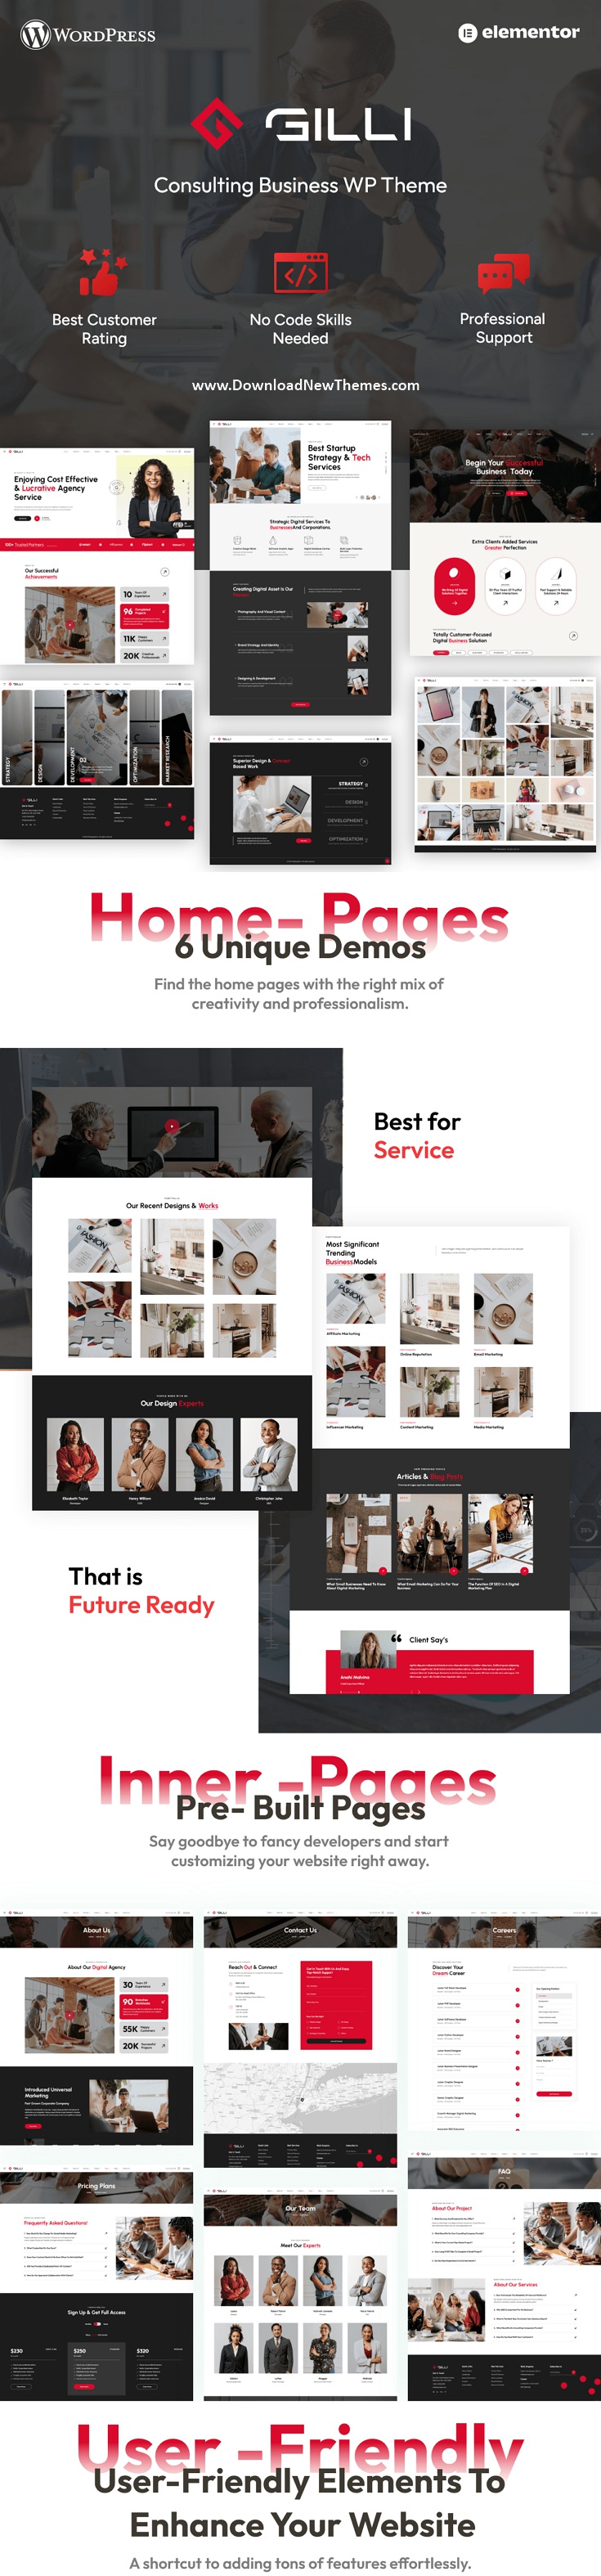 Gilli - Business Consulting WordPress Theme Review